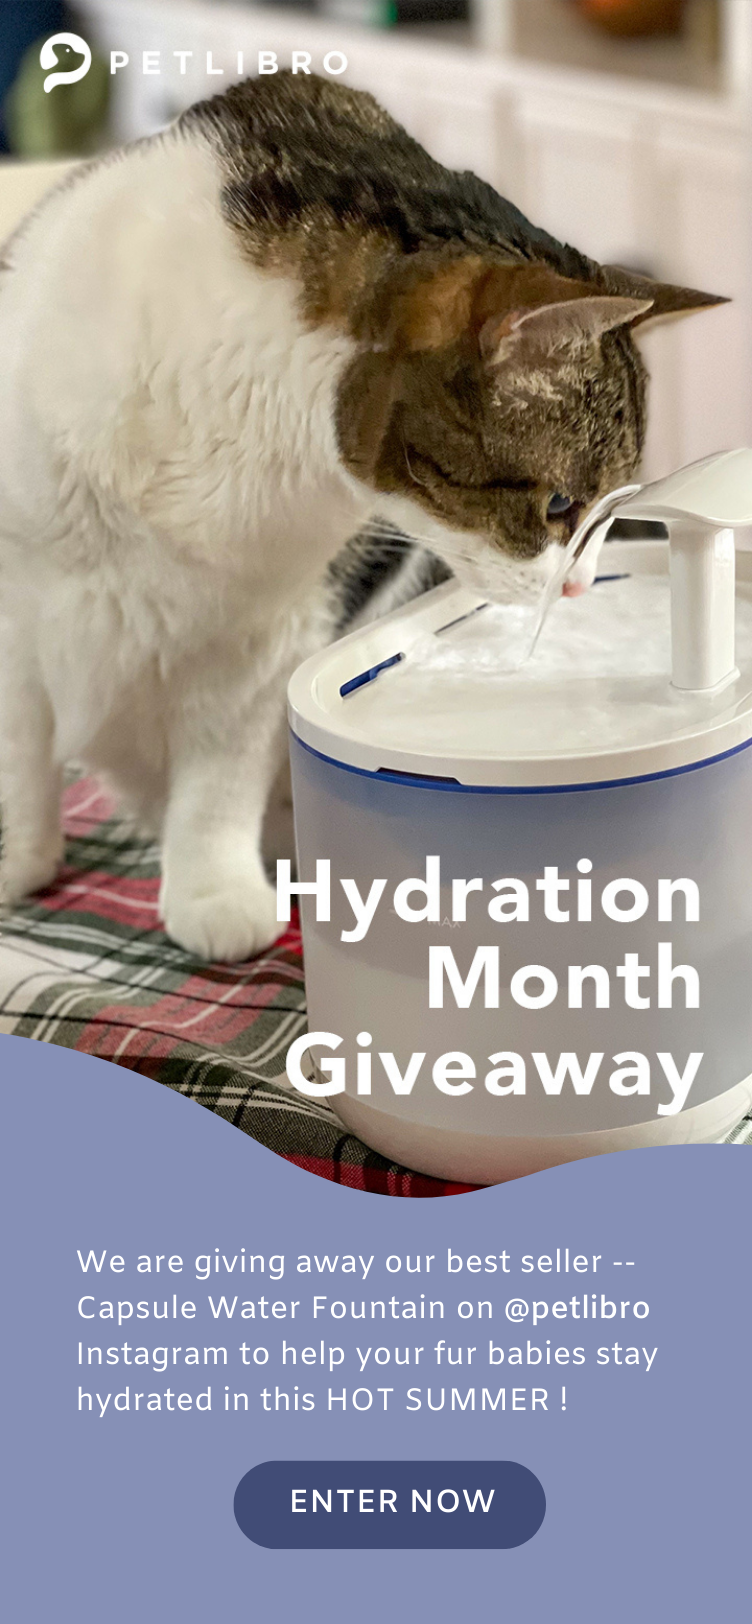 Hydration Month Giveaway